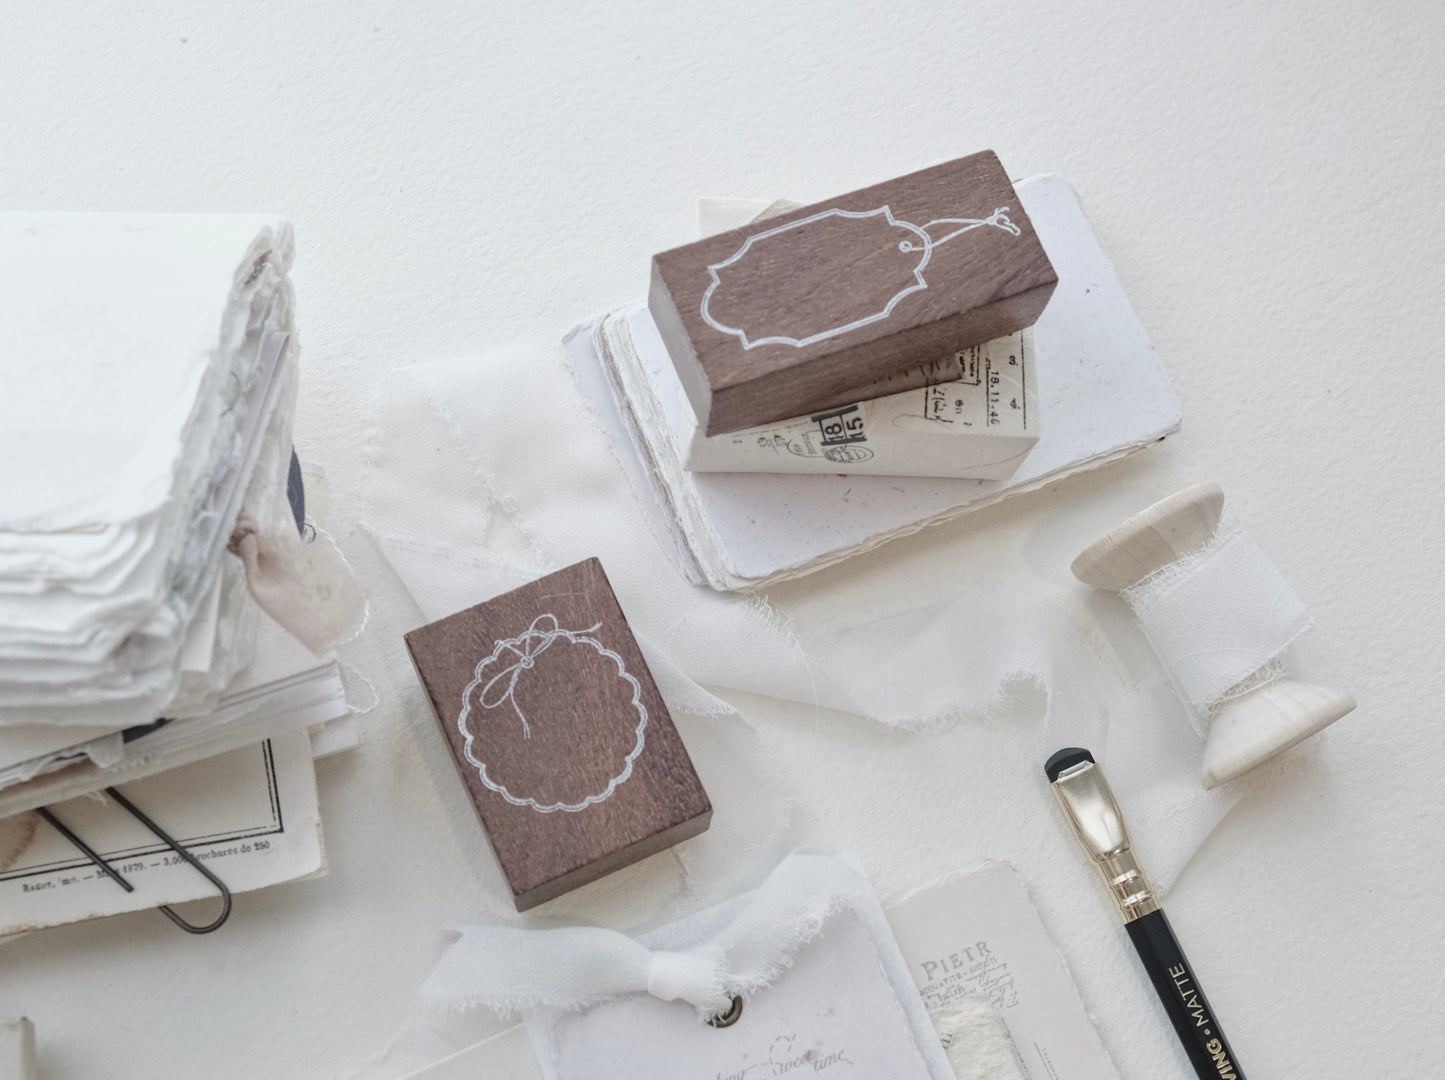 Jieyanow Atelier Rubber Stamp - Not Your Usual Tags, 5 designs